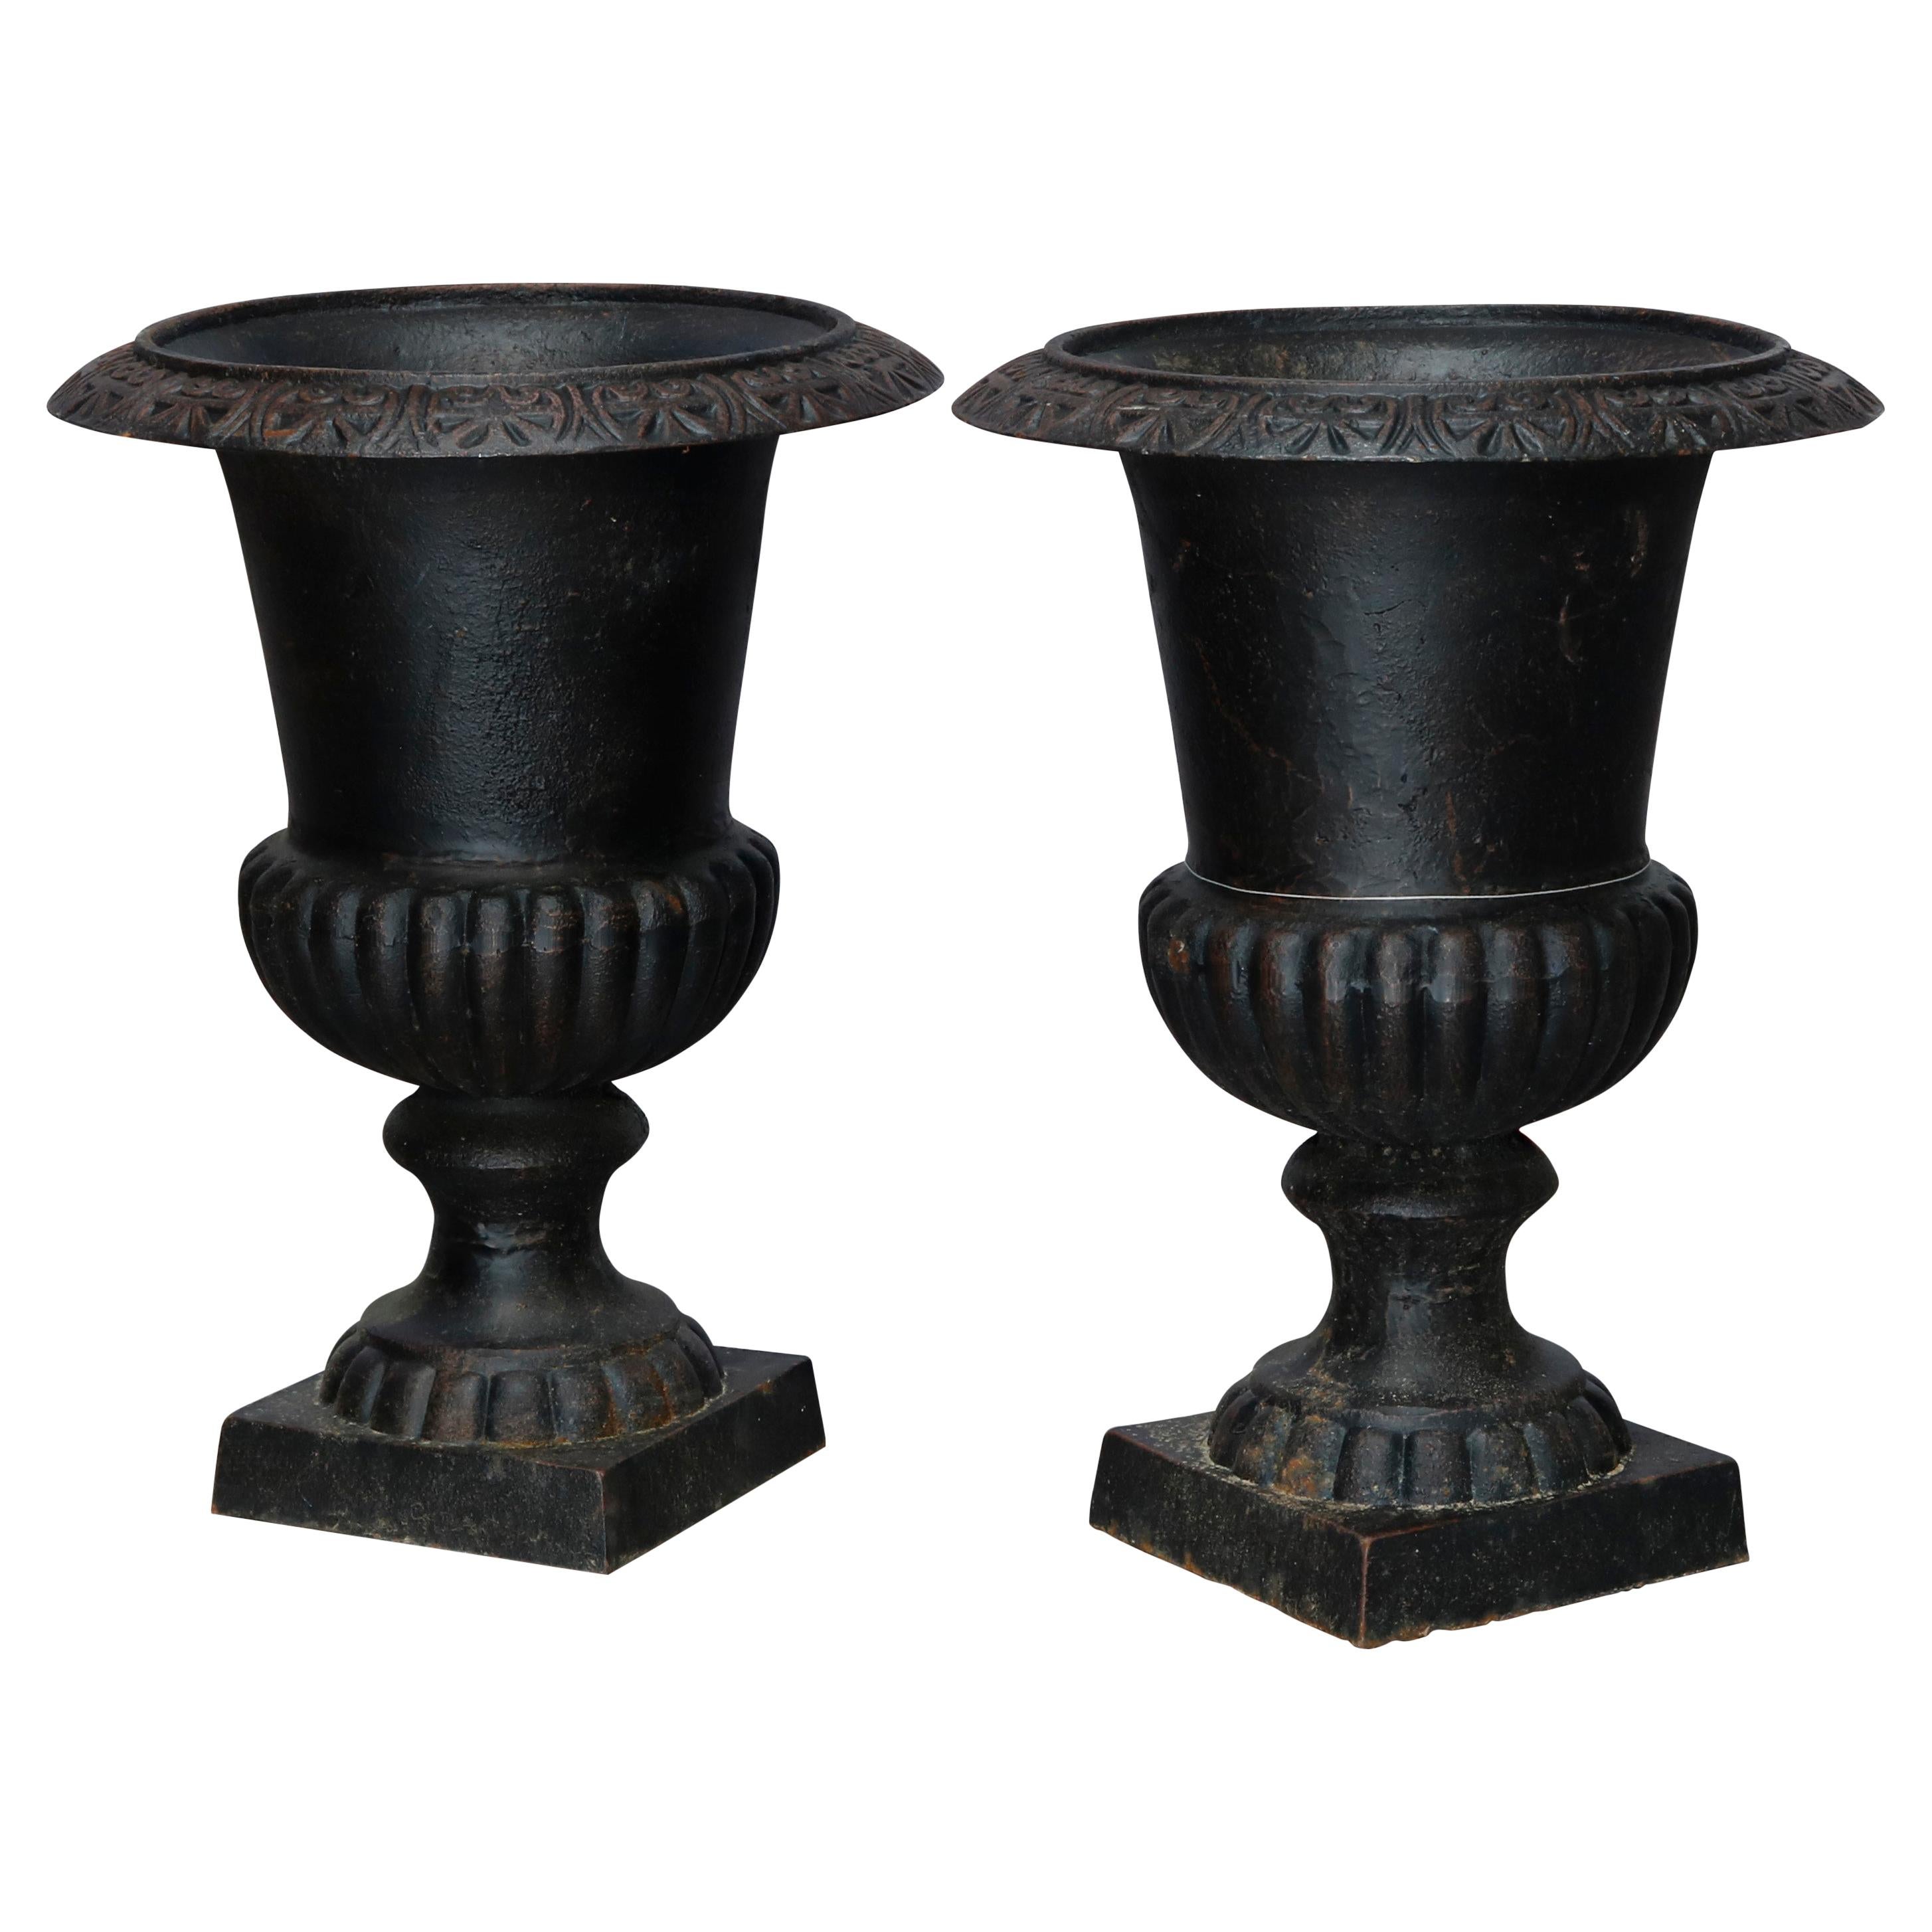 Pair of Neoclassical Style Melon Ribbed Cast Iron Garden Urns, 20th C